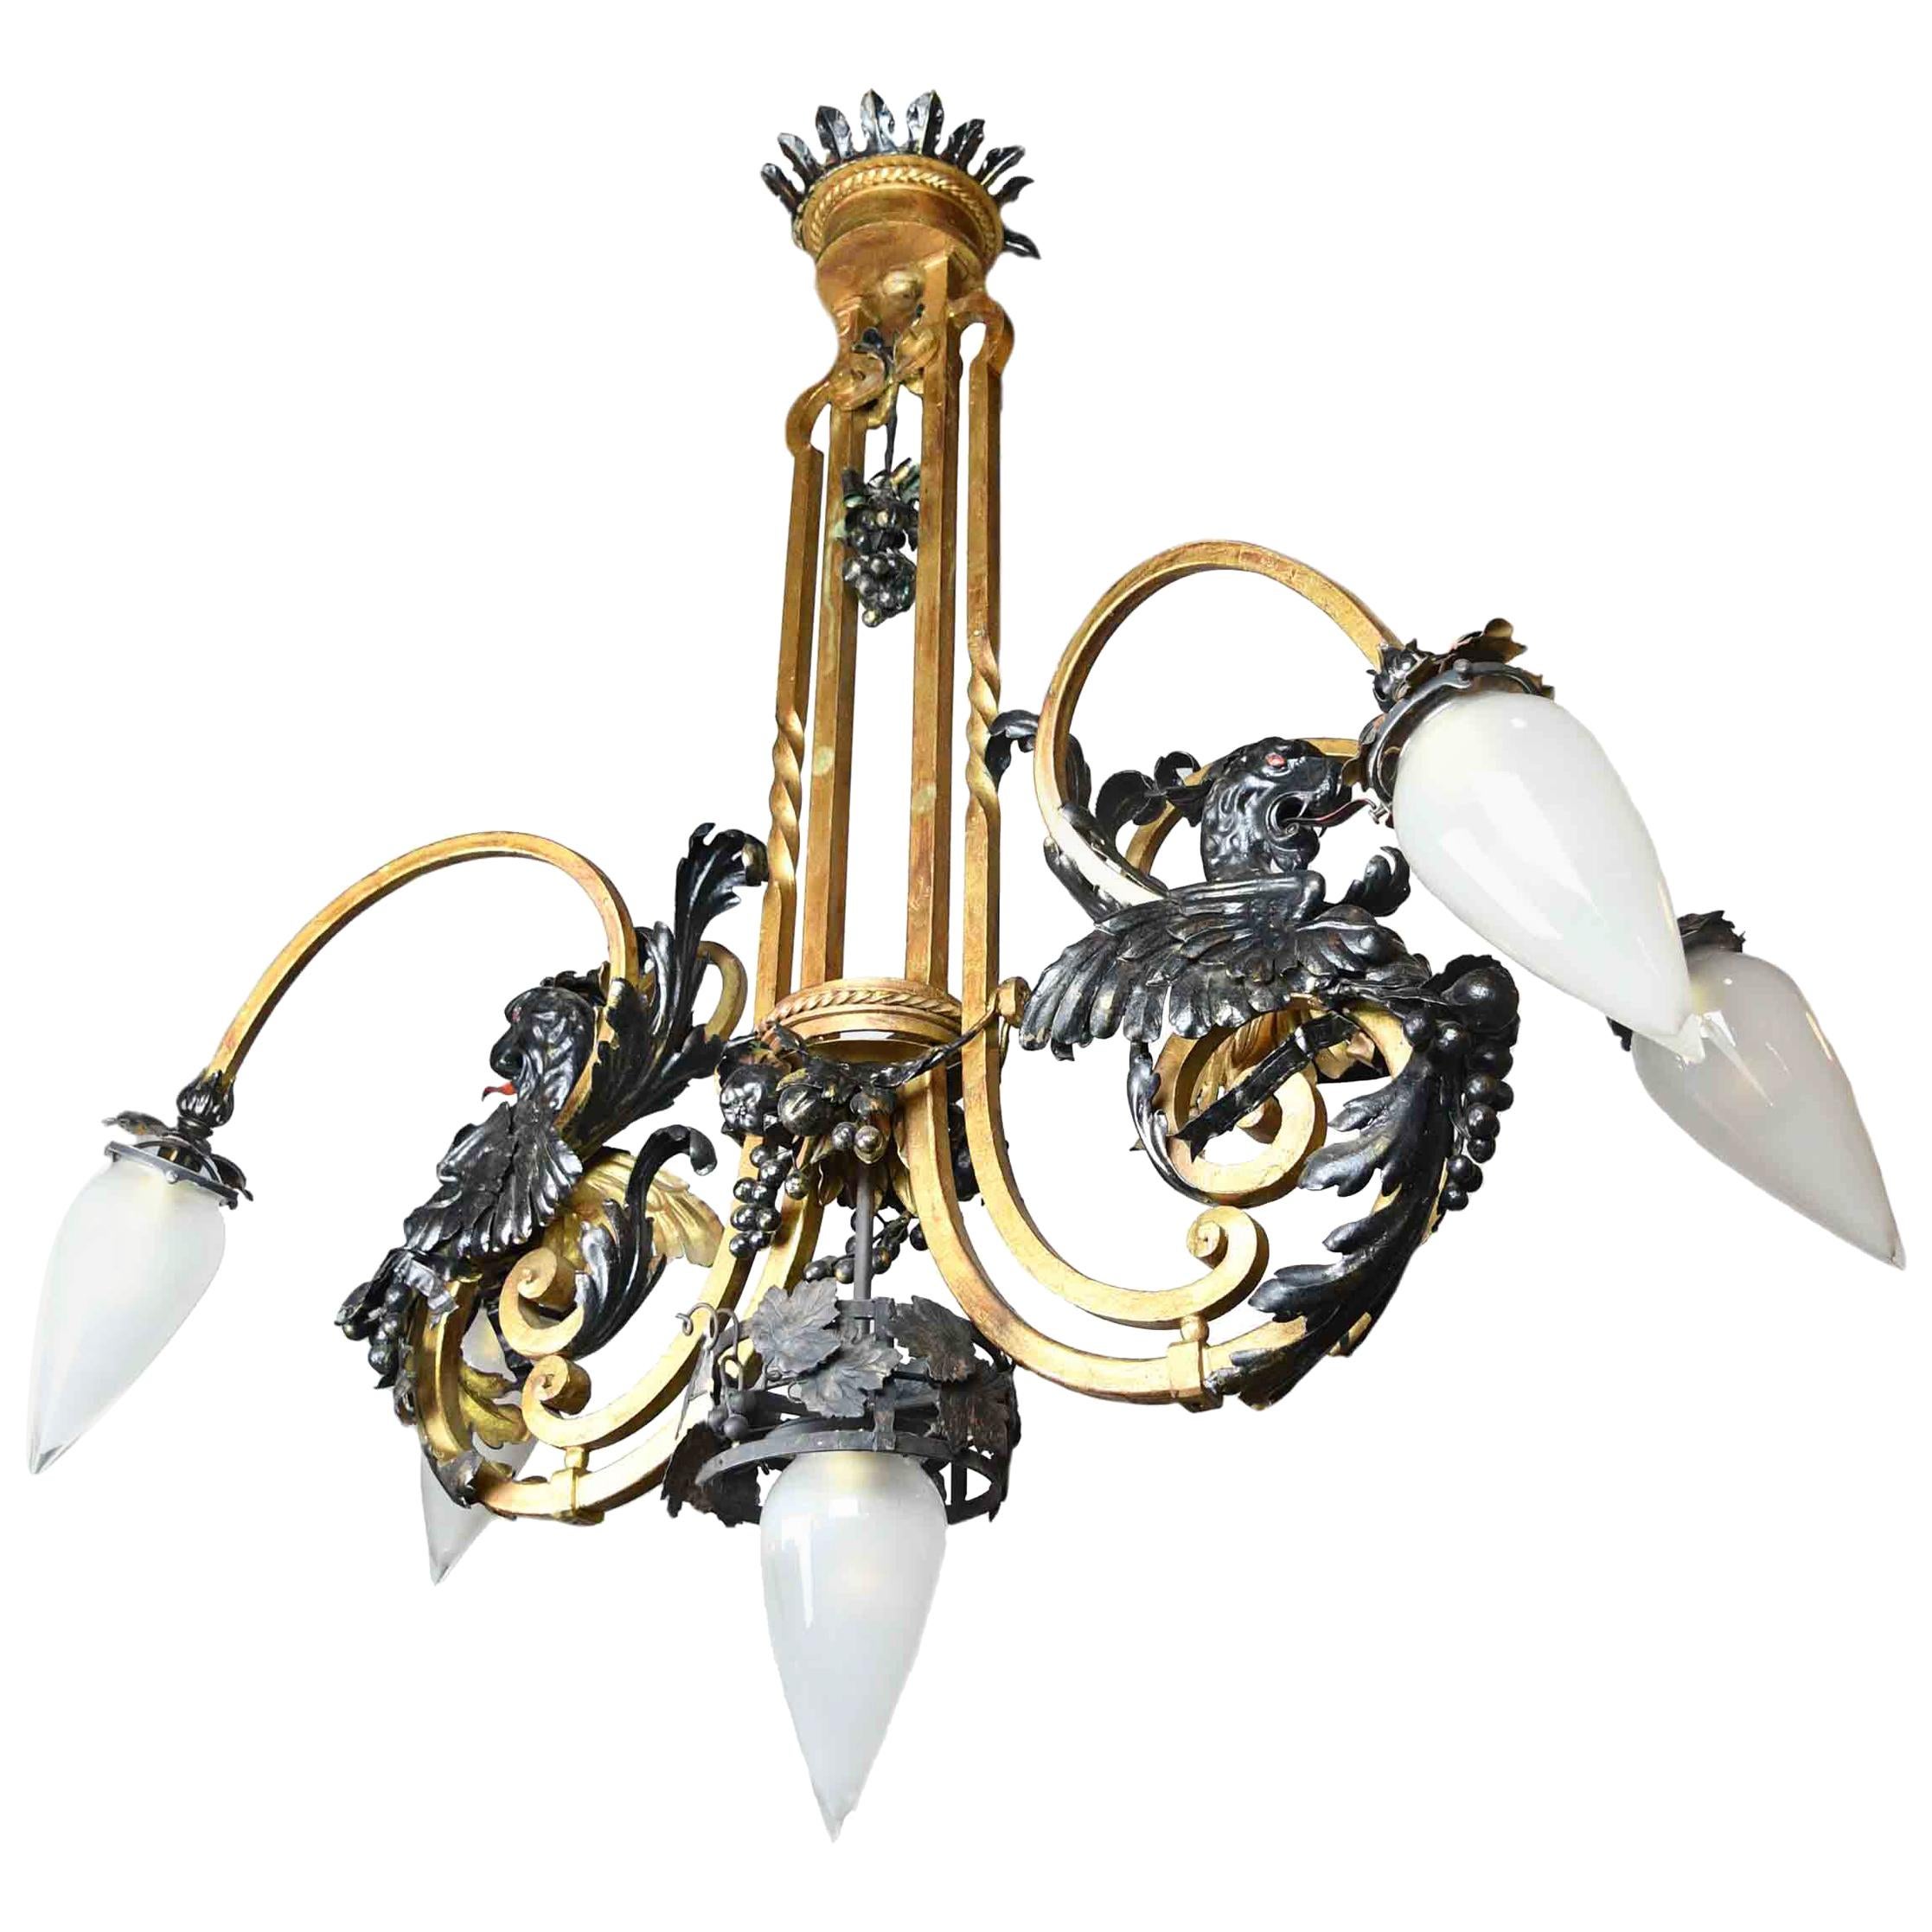 Gothic Dragon Chandelier with Teardrop Shades